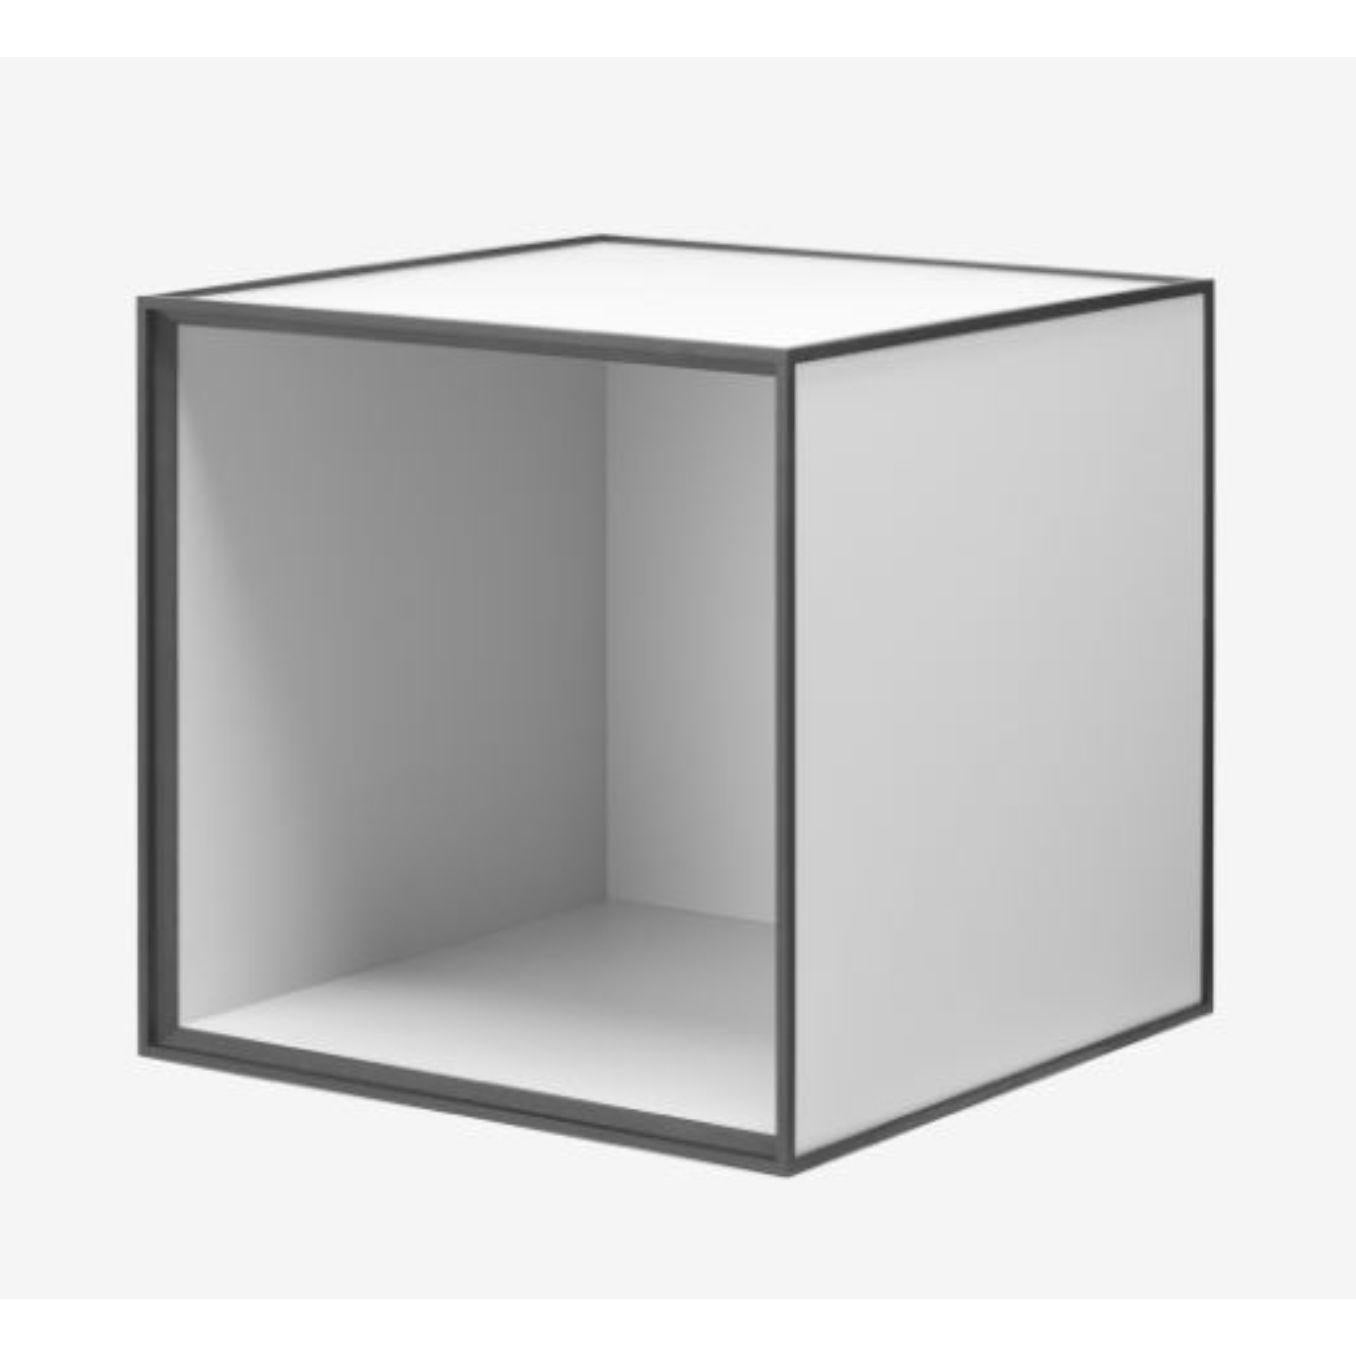 35 light grey frame box by Lassen
Dimensions: W 35 x D 35 x H 35 cm 
Materials: Finér, Melamin, Melamin, Melamine, Metal, Veneer, Oak
Also available in different colors and dimensions. 

By Lassen is a Danish design brand focused on iconic